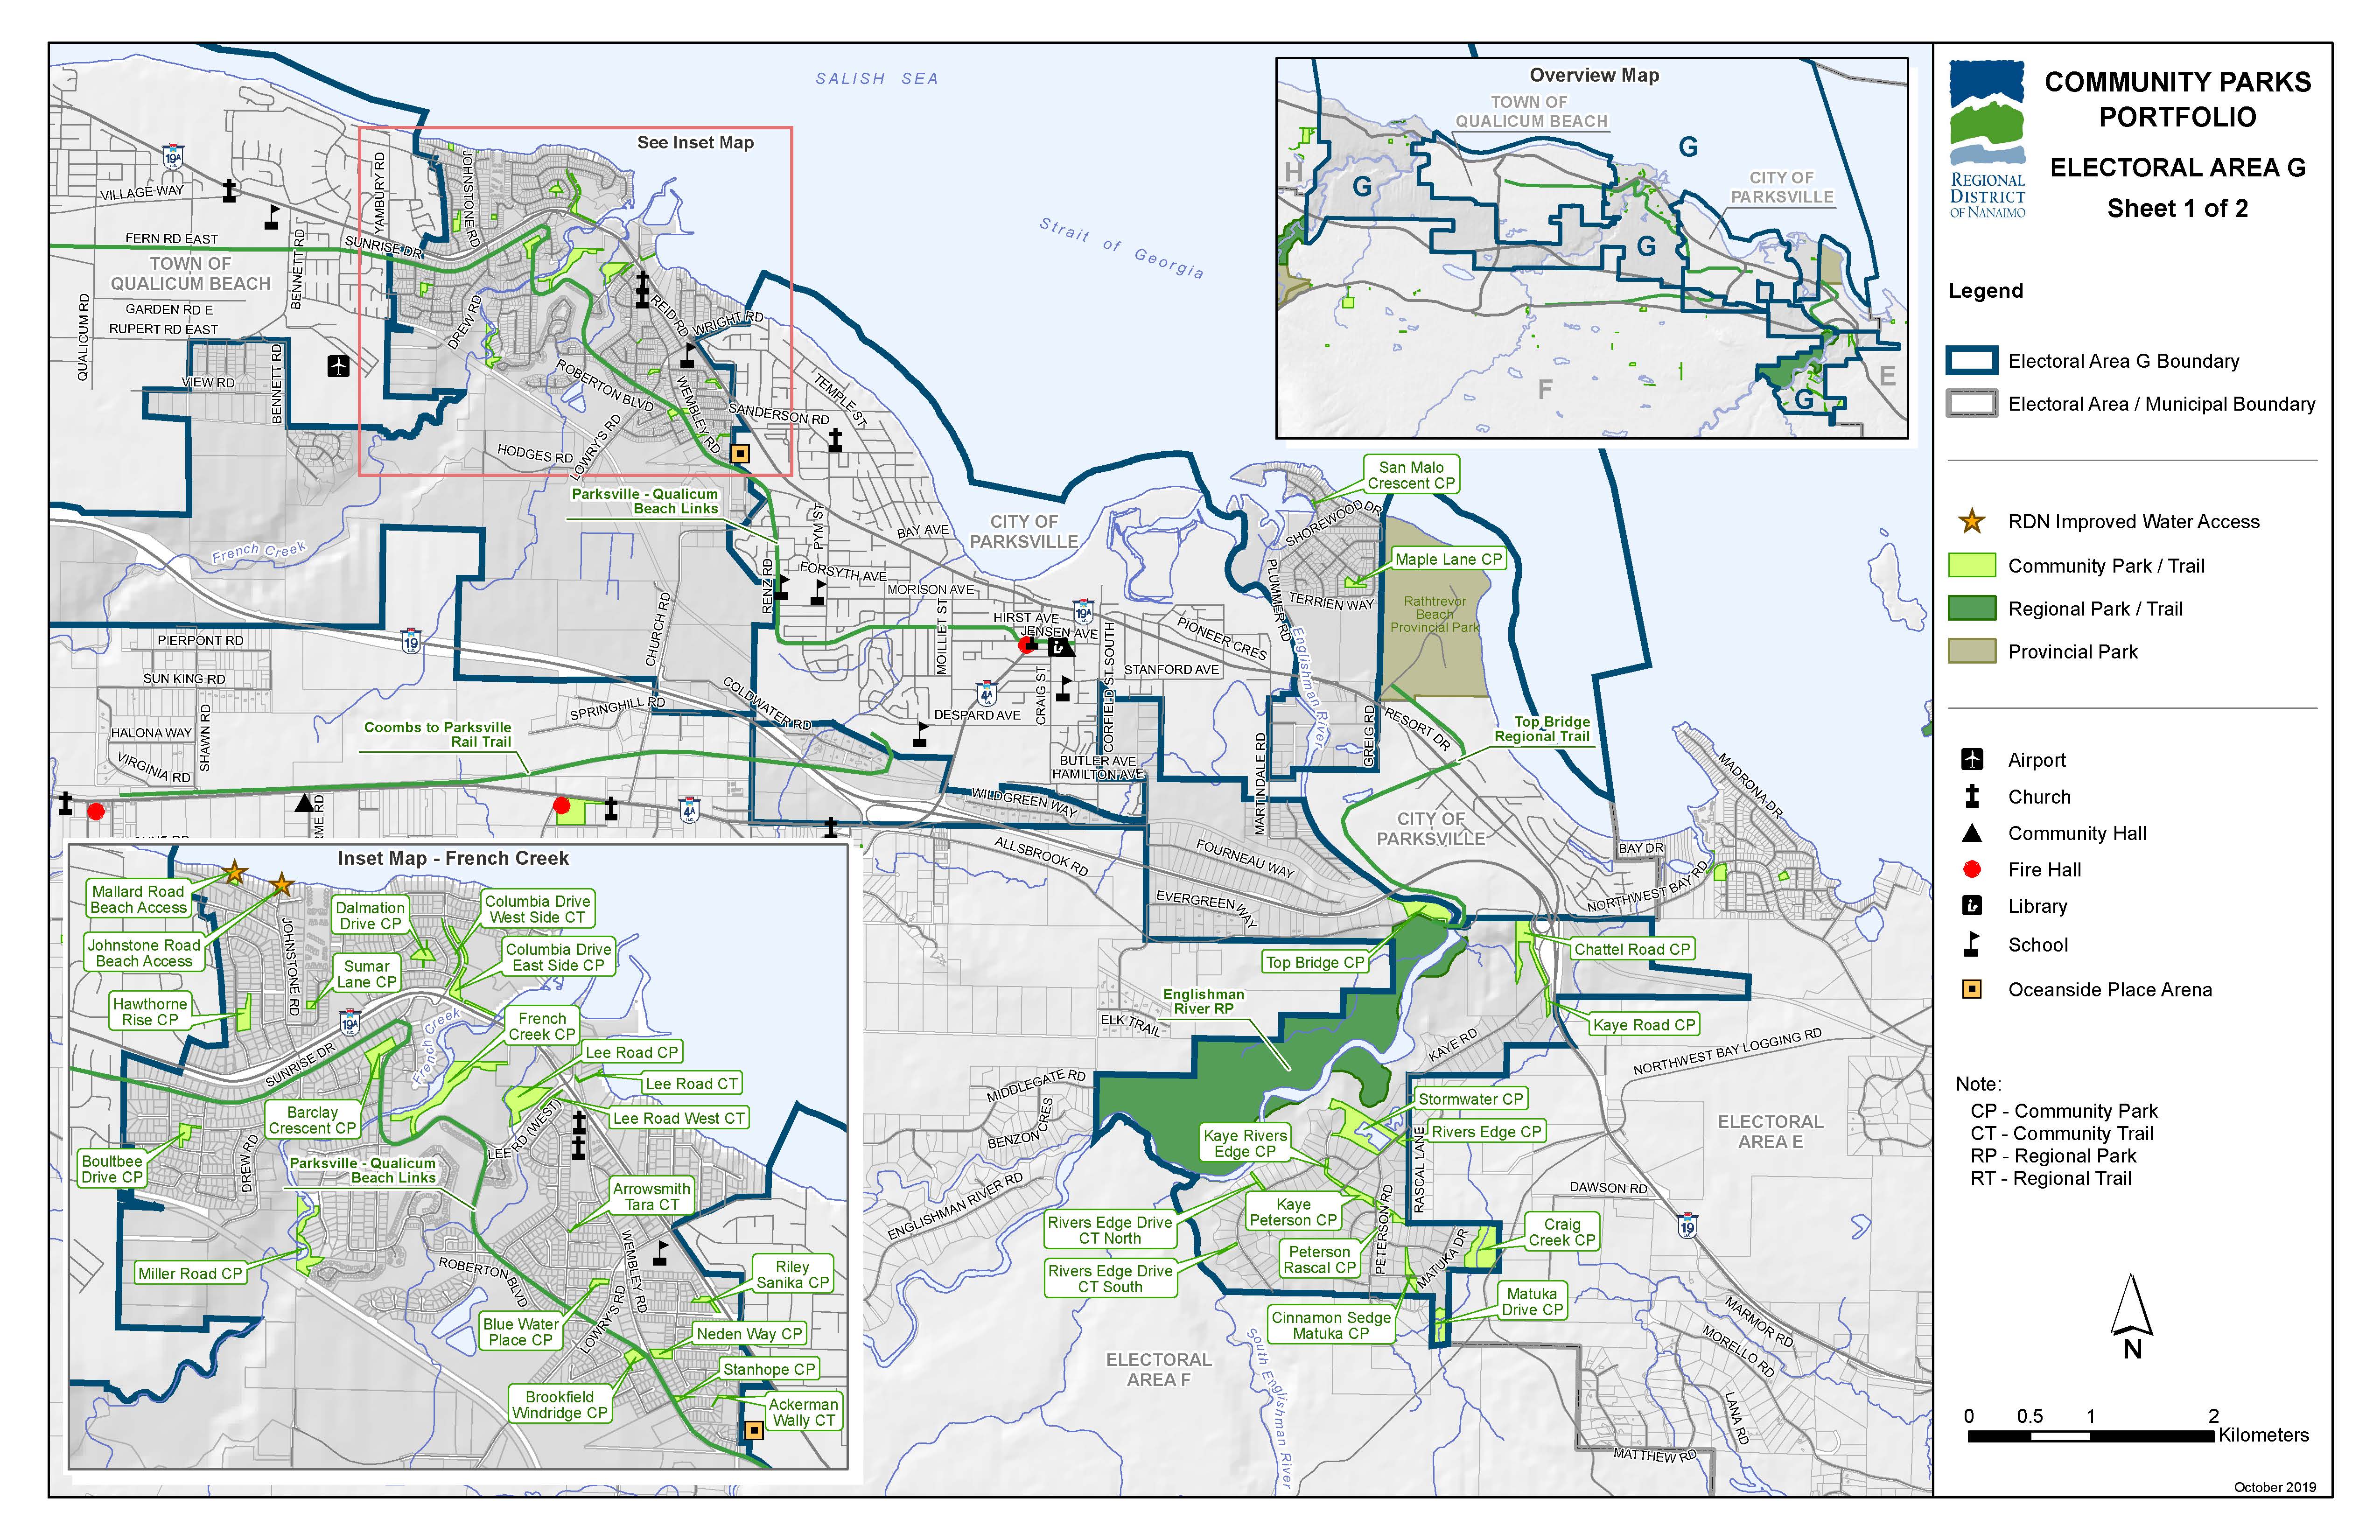 Community Parks and Trails in Area G (East)